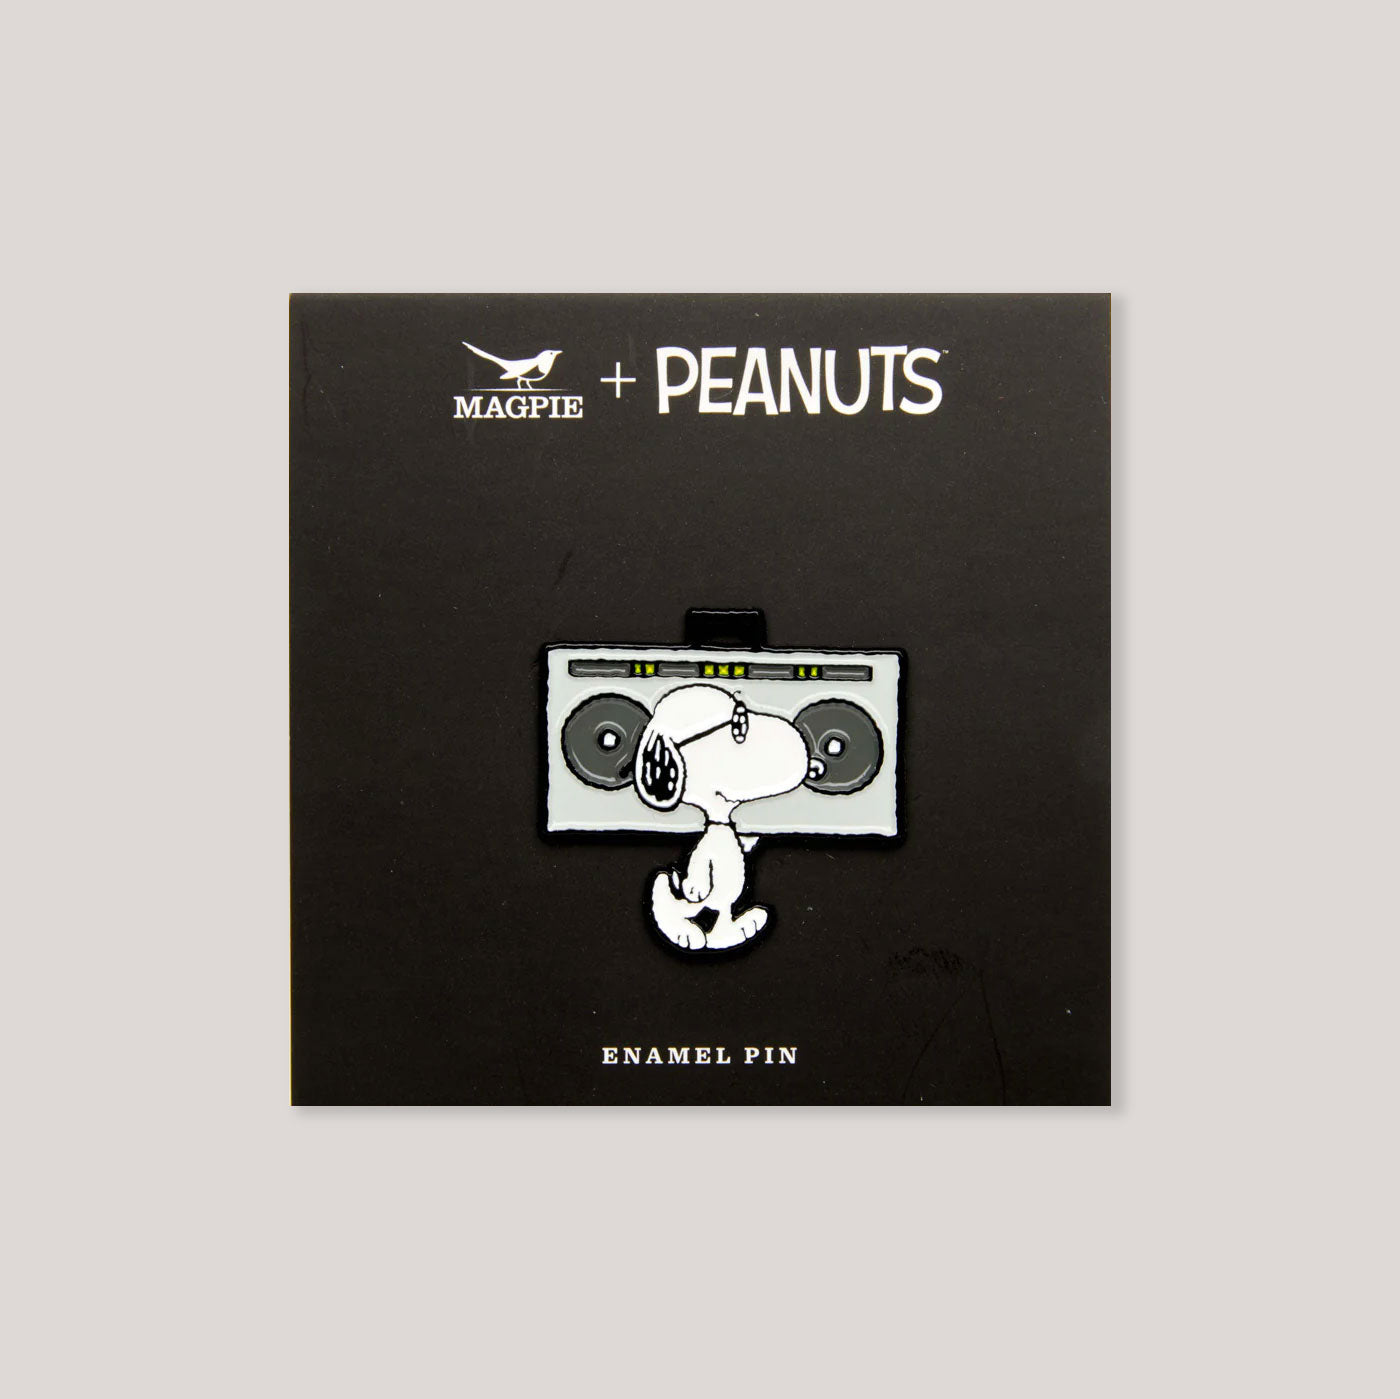 Peanuts x Magpie Enamel Pins | Music Is Life - Boombox